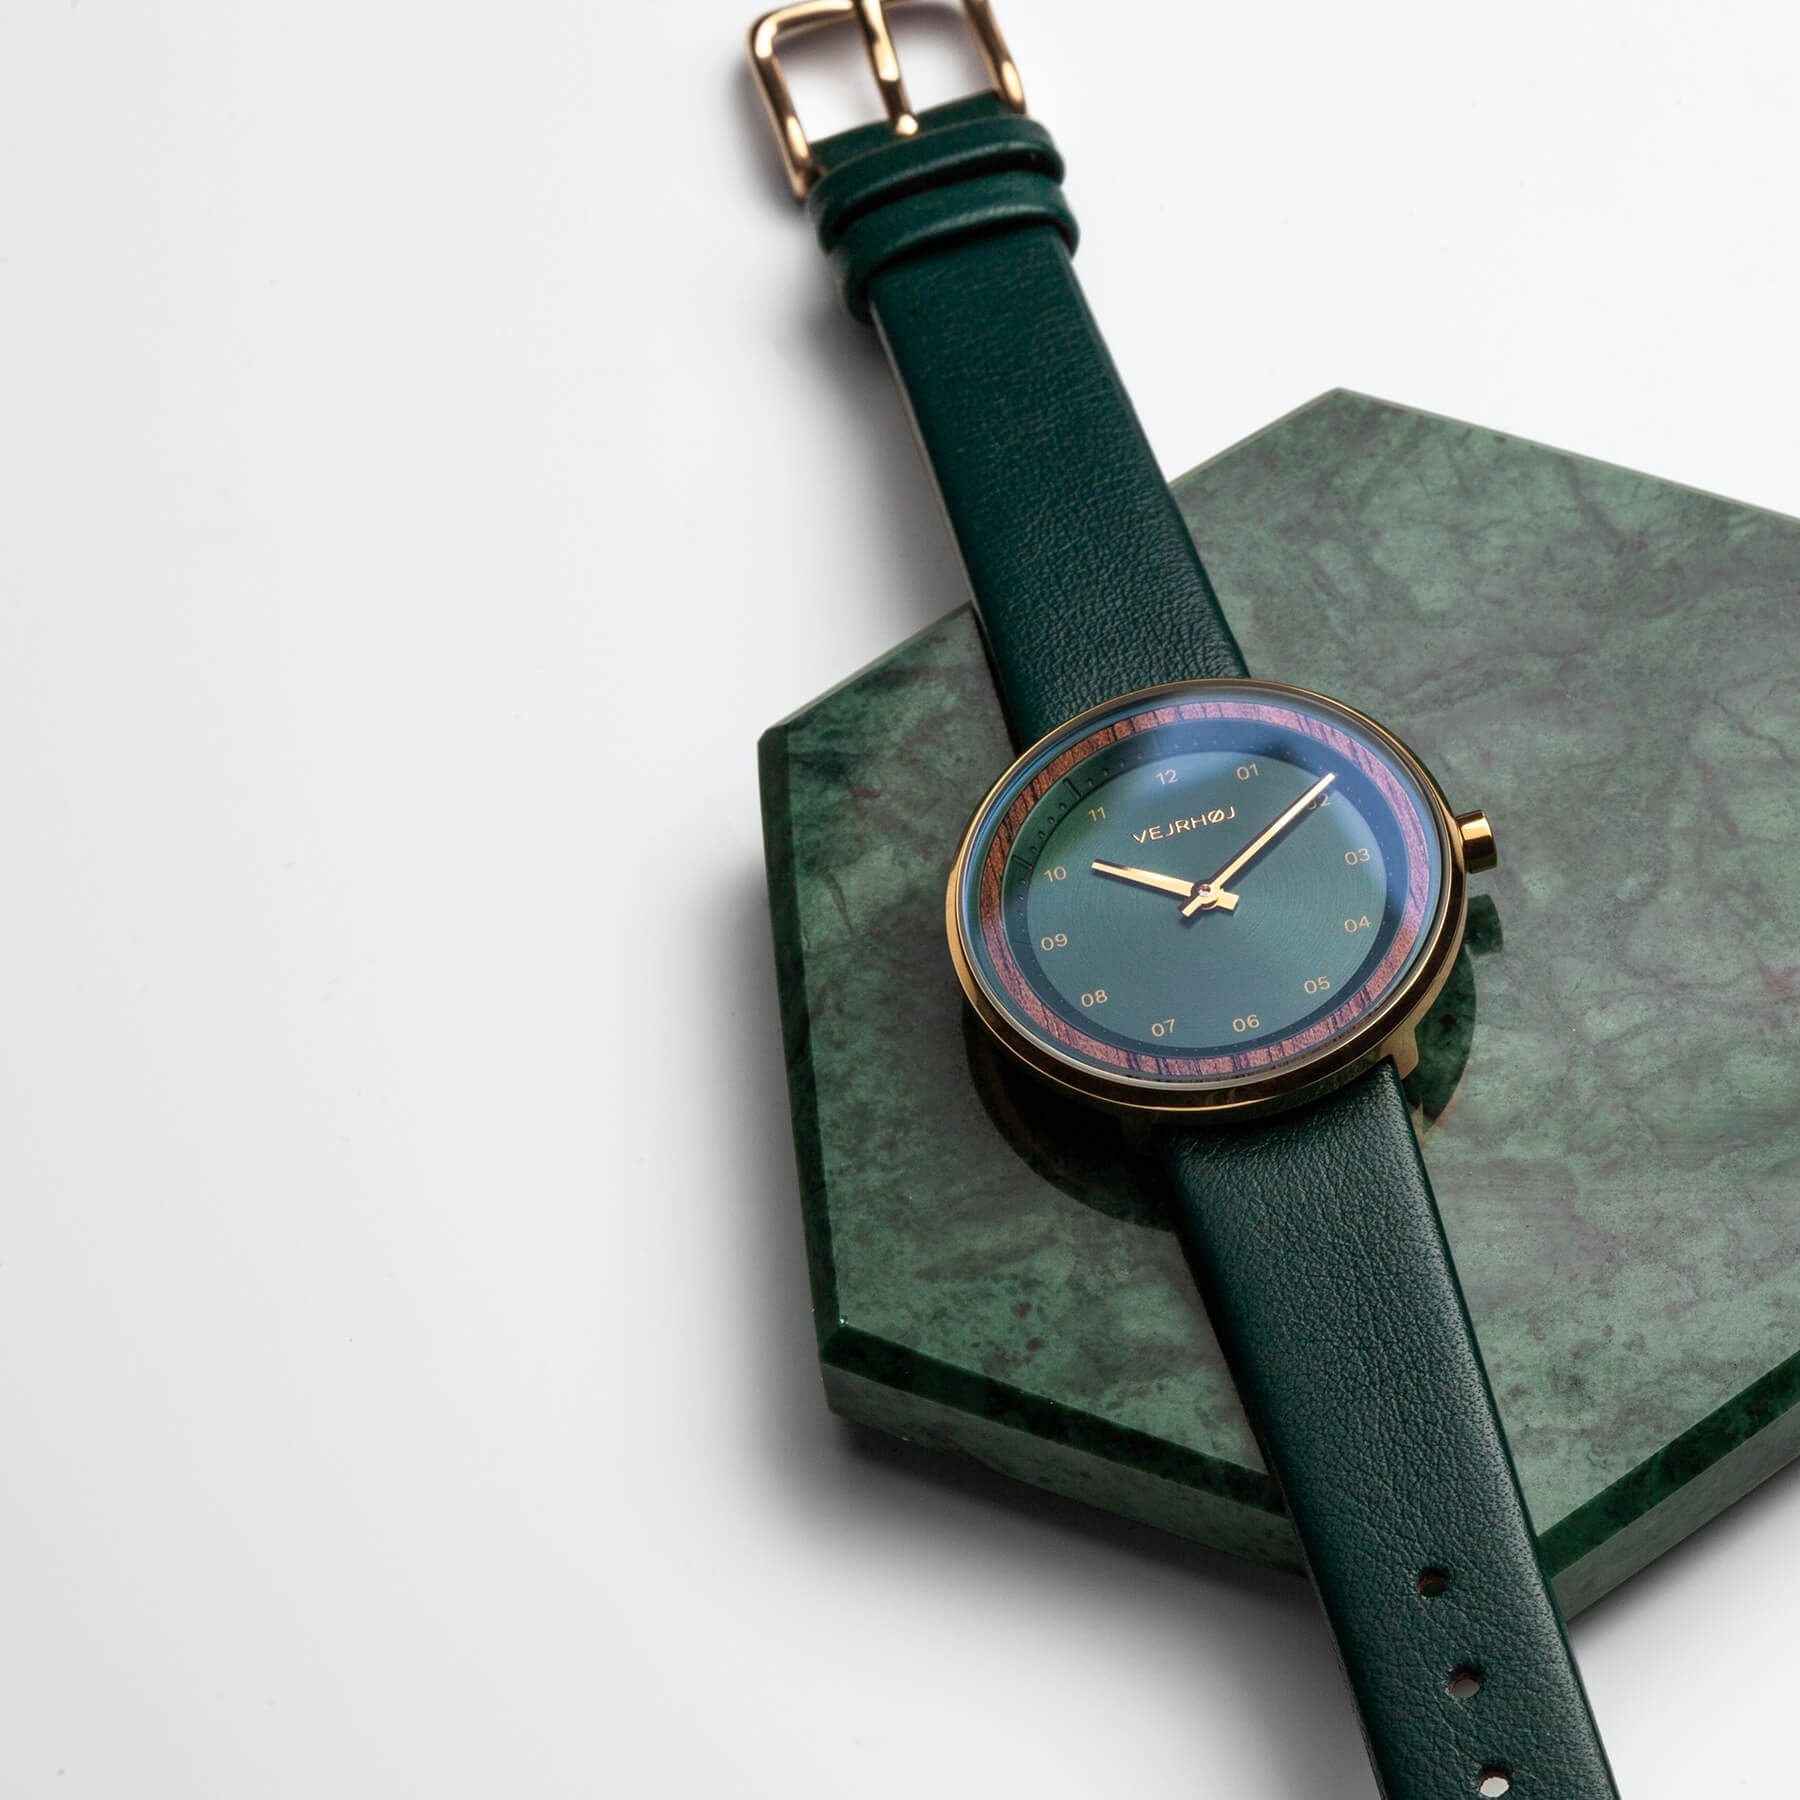 Green simplistic watch on green surface